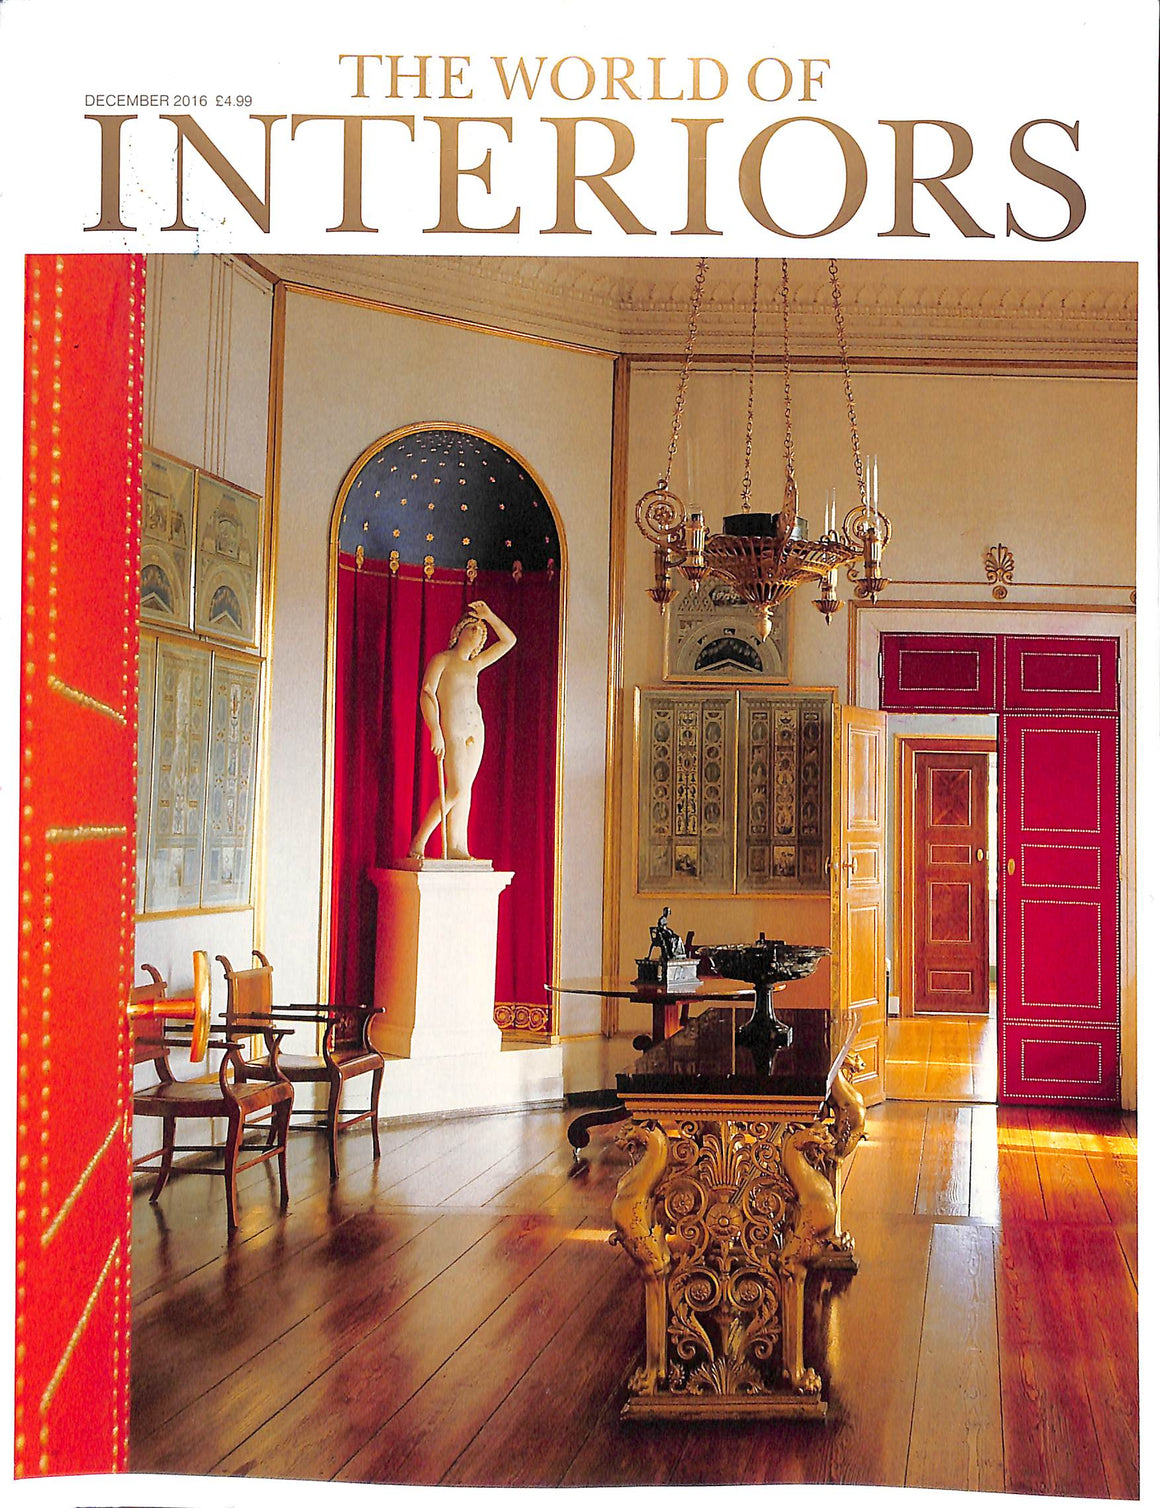 The World of Interiors December 2016 (SOLD)